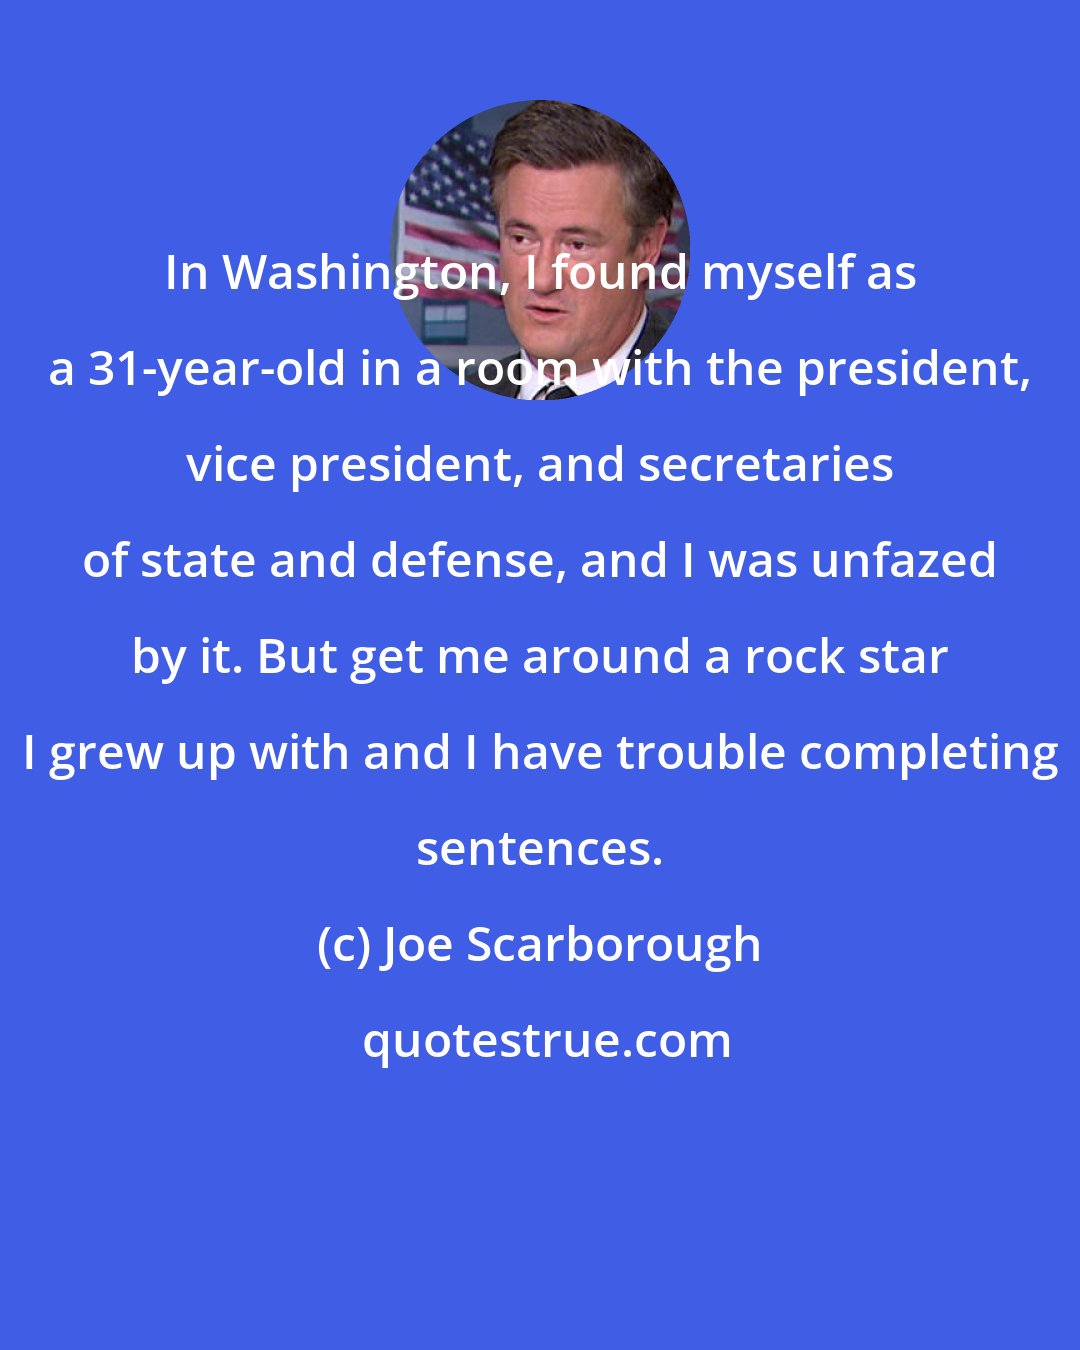 Joe Scarborough: In Washington, I found myself as a 31-year-old in a room with the president, vice president, and secretaries of state and defense, and I was unfazed by it. But get me around a rock star I grew up with and I have trouble completing sentences.